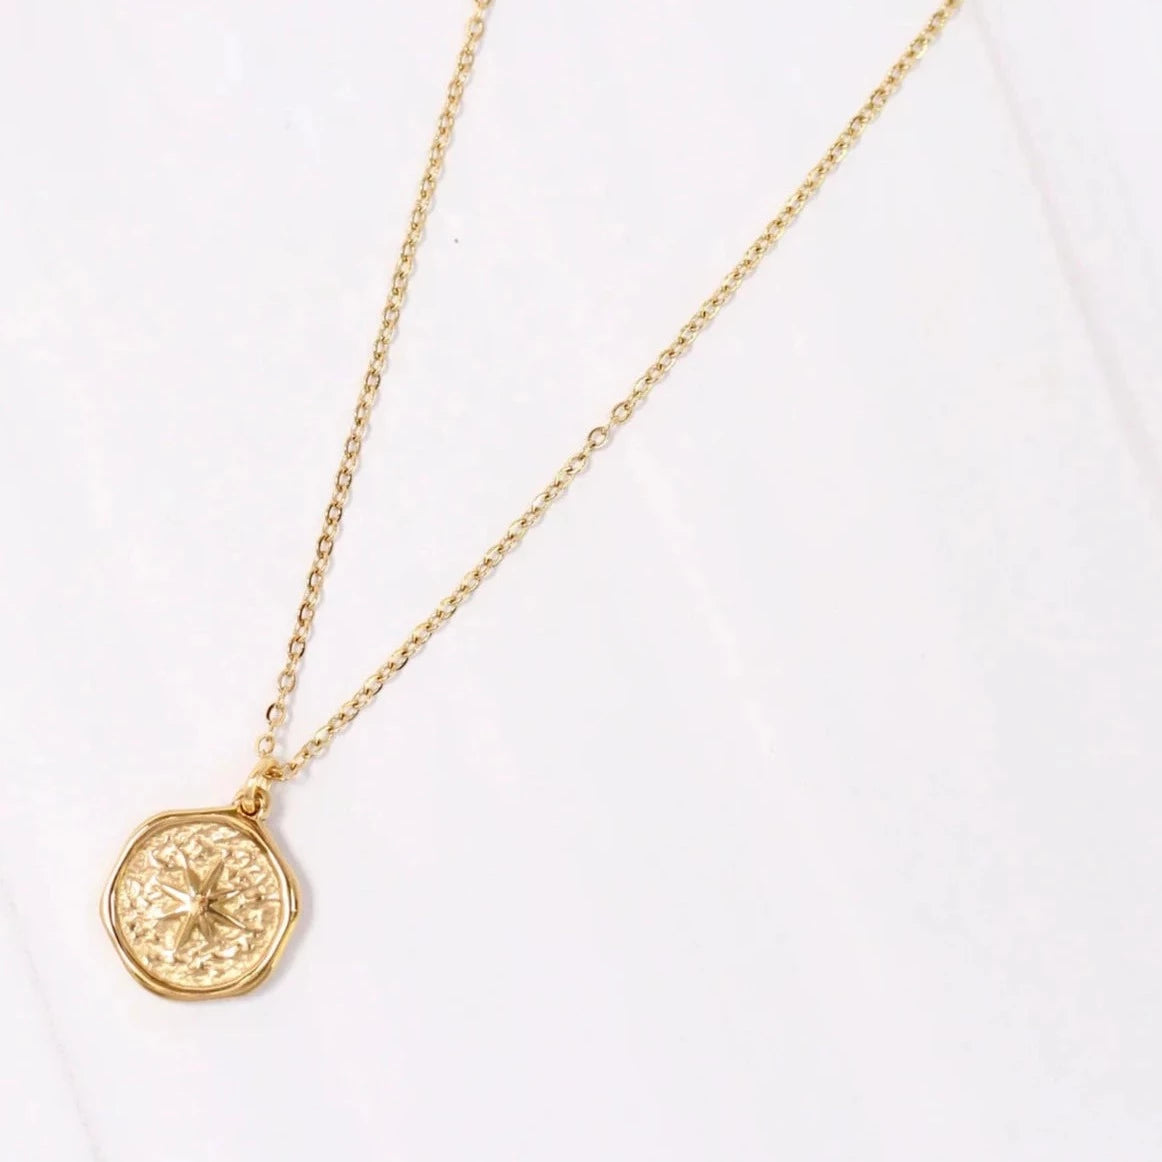 Marieville Circle Charm Necklace Gold-Necklaces-Caroline Hill-LouisGeorge Boutique, Women’s Fashion Boutique Located in Trussville, Alabama